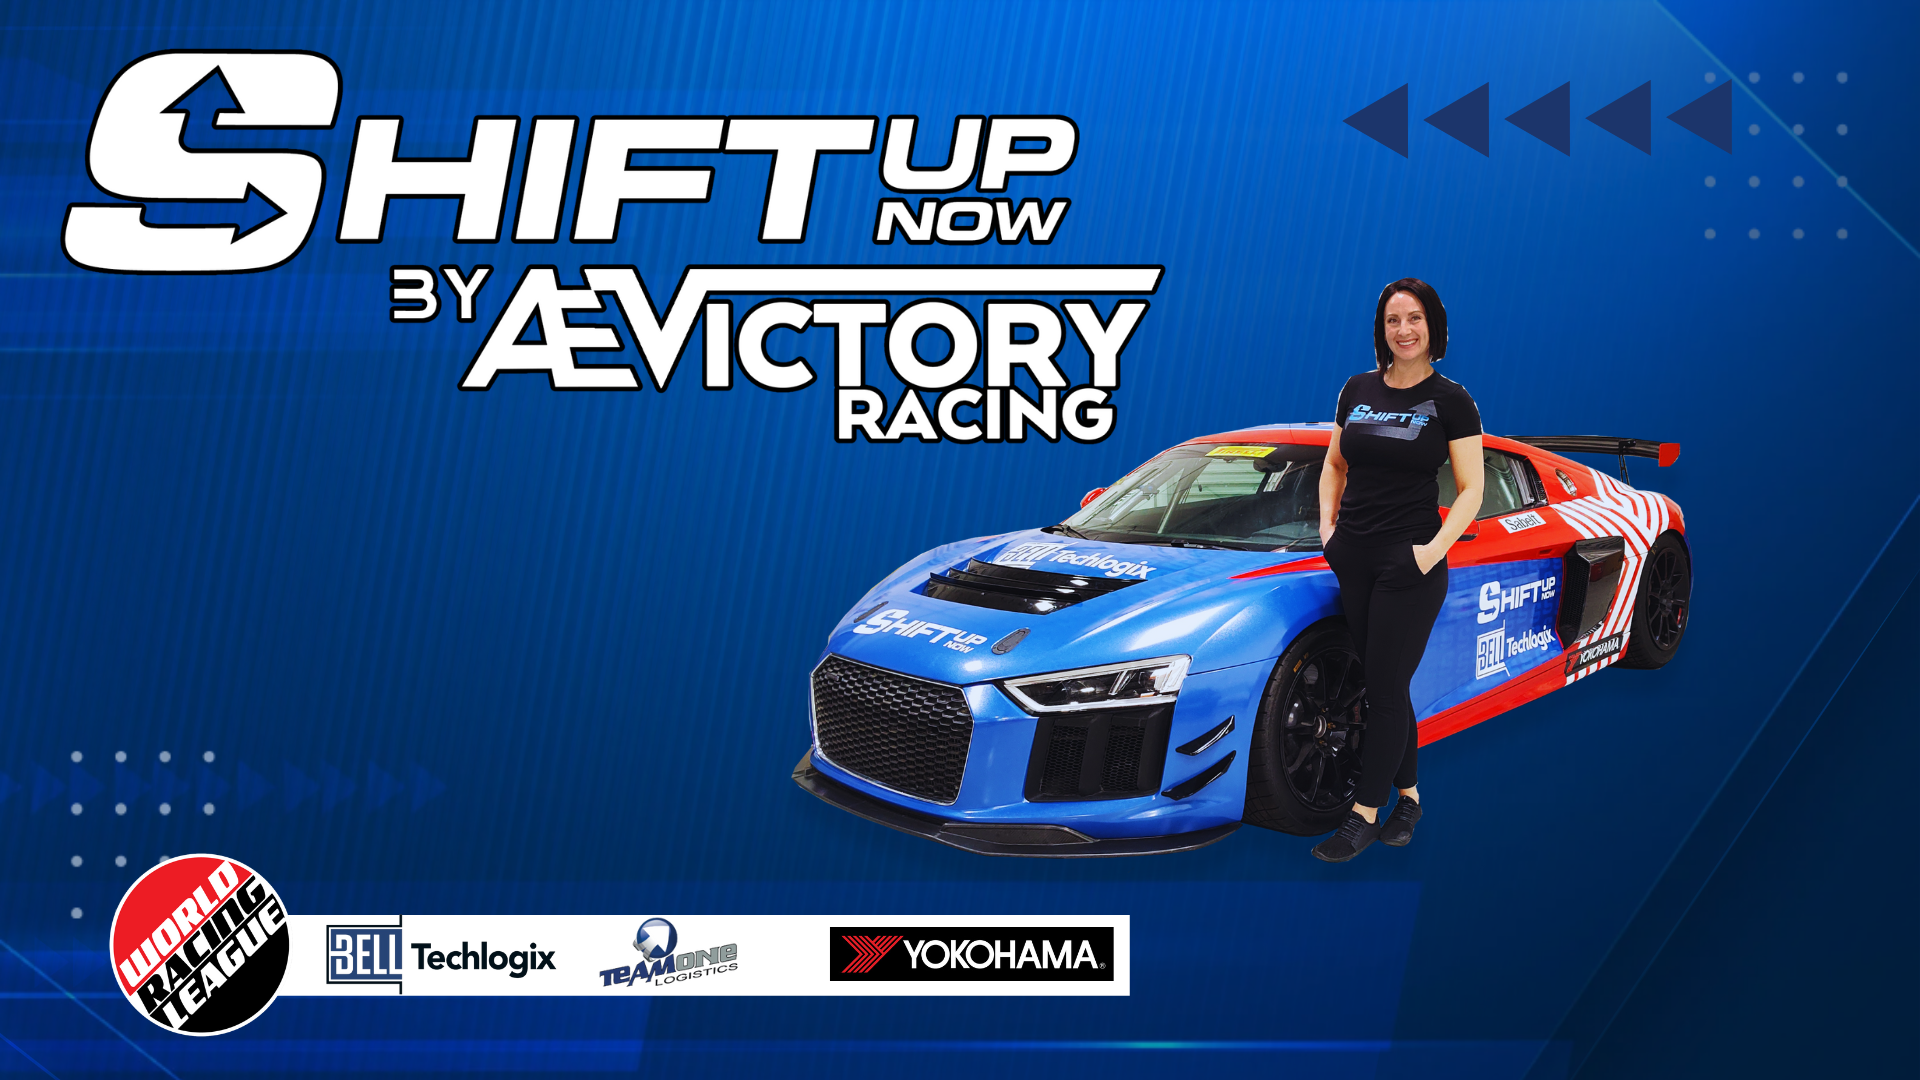 Shift Up Now Announces Partnership with AE Victory Racing: Team to Make Debut Run in Upcoming Race at COTA